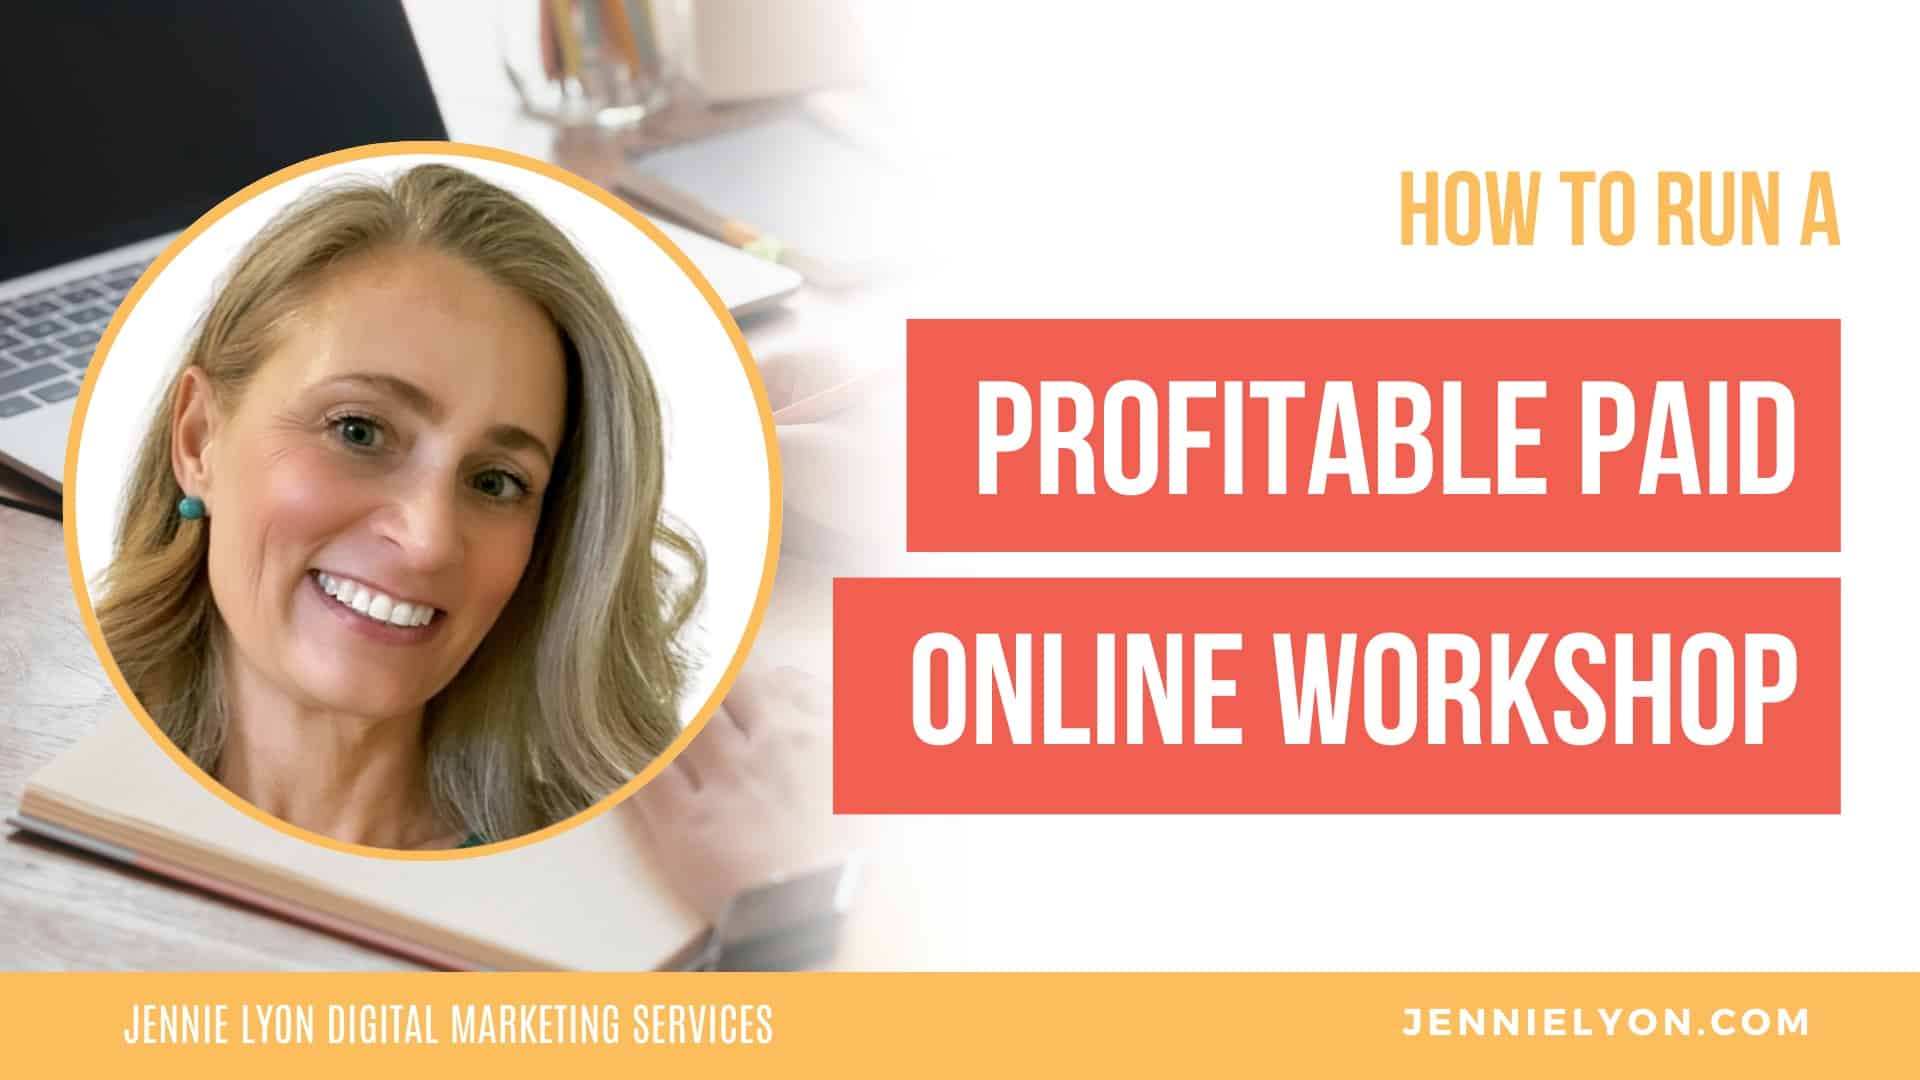 How to Run a Profitable Paid Online Workshop